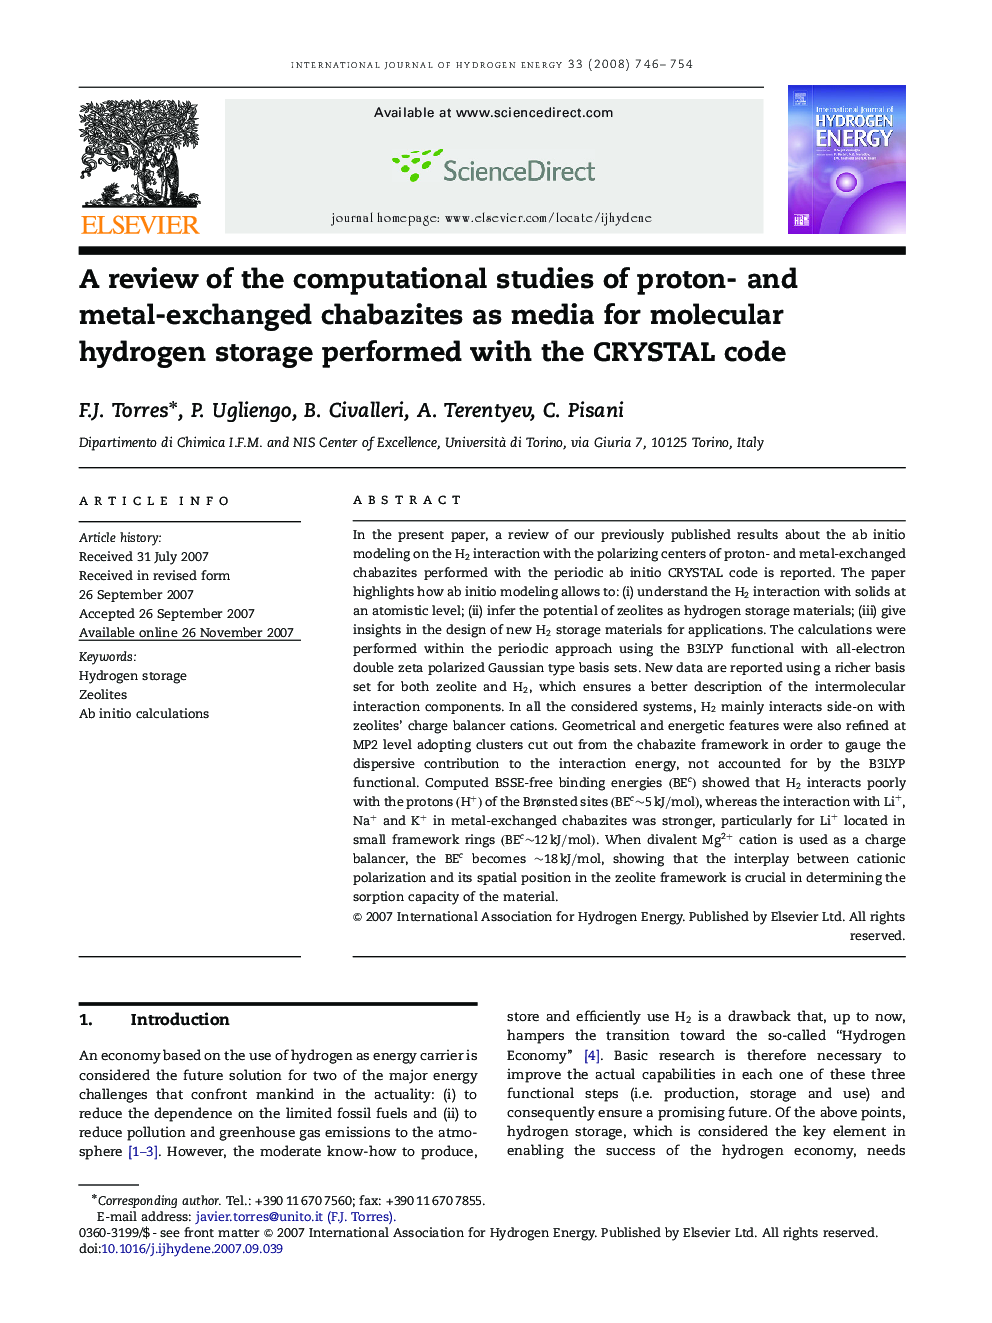 A review of the computational studies of proton- and metal-exchanged chabazites as media for molecular hydrogen storage performed with the CRYSTAL code